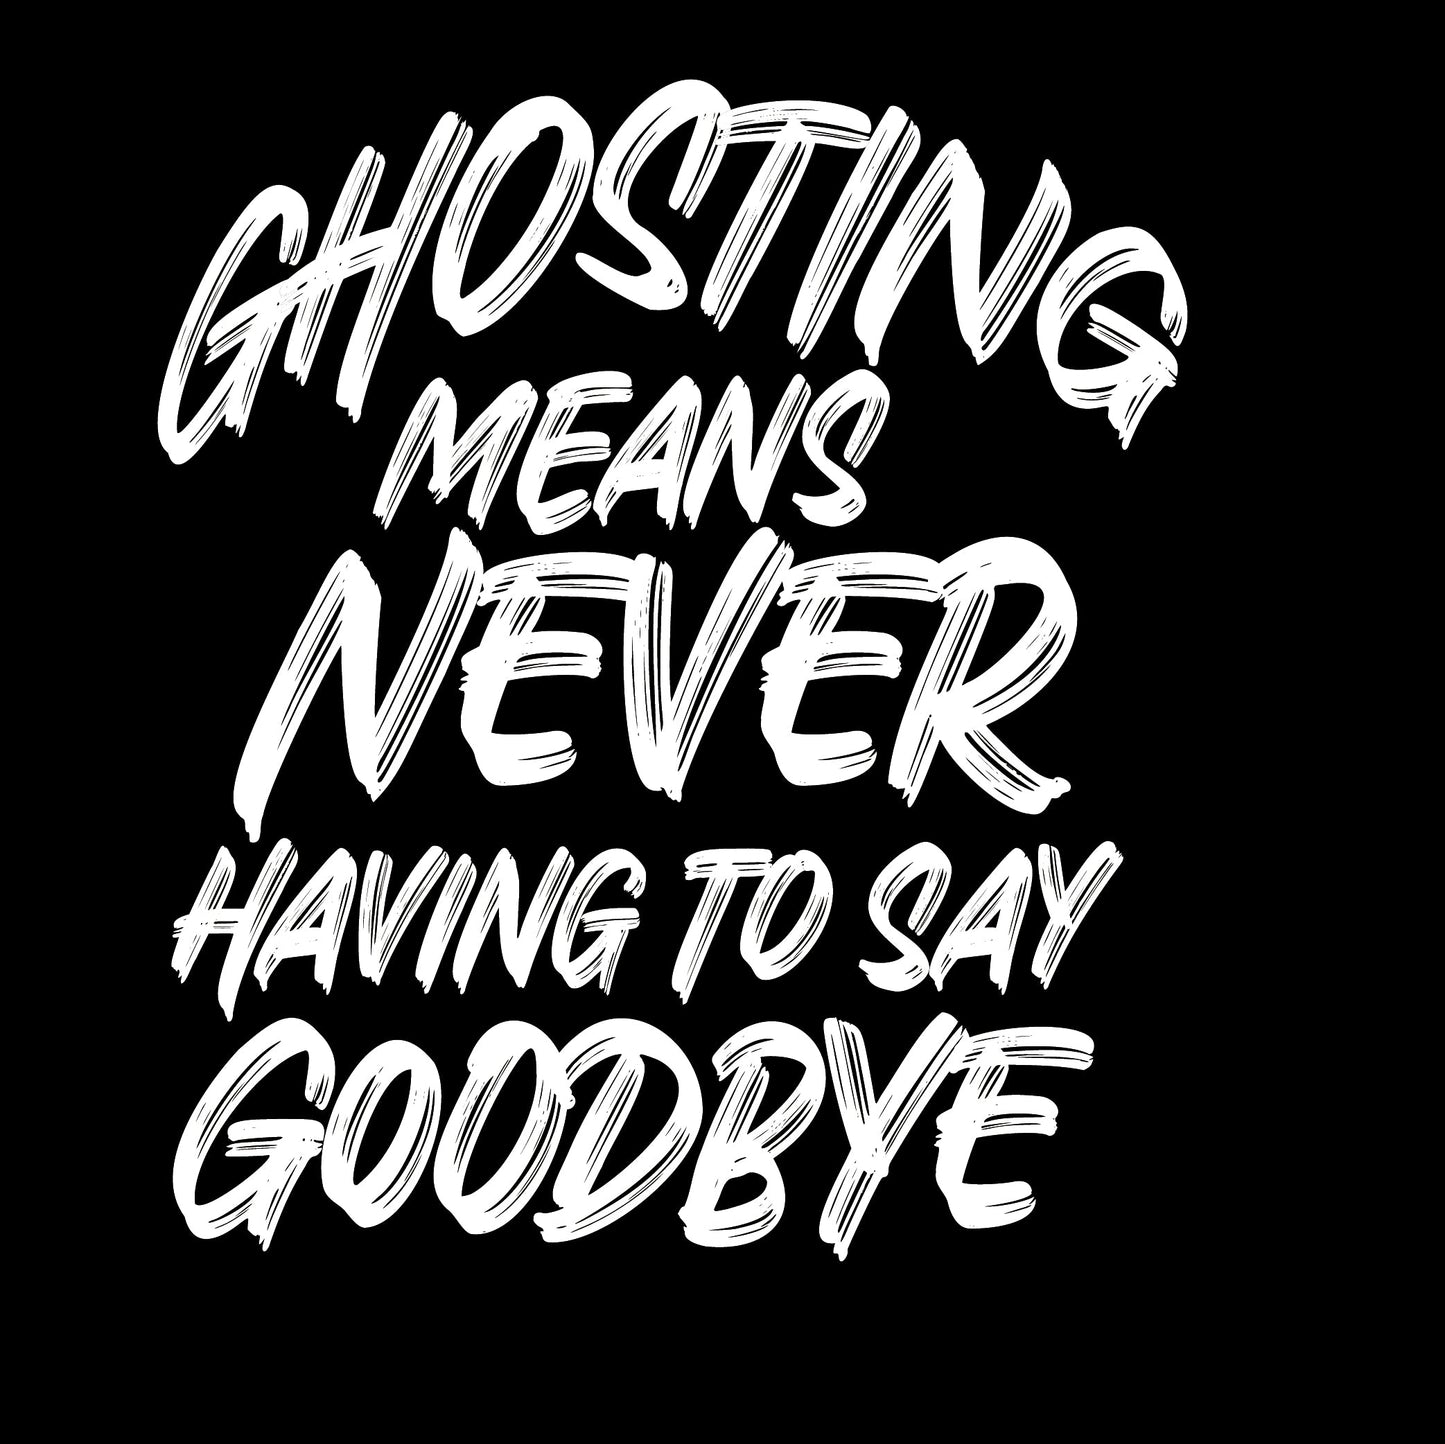 Ghosting means never having to say goodbye